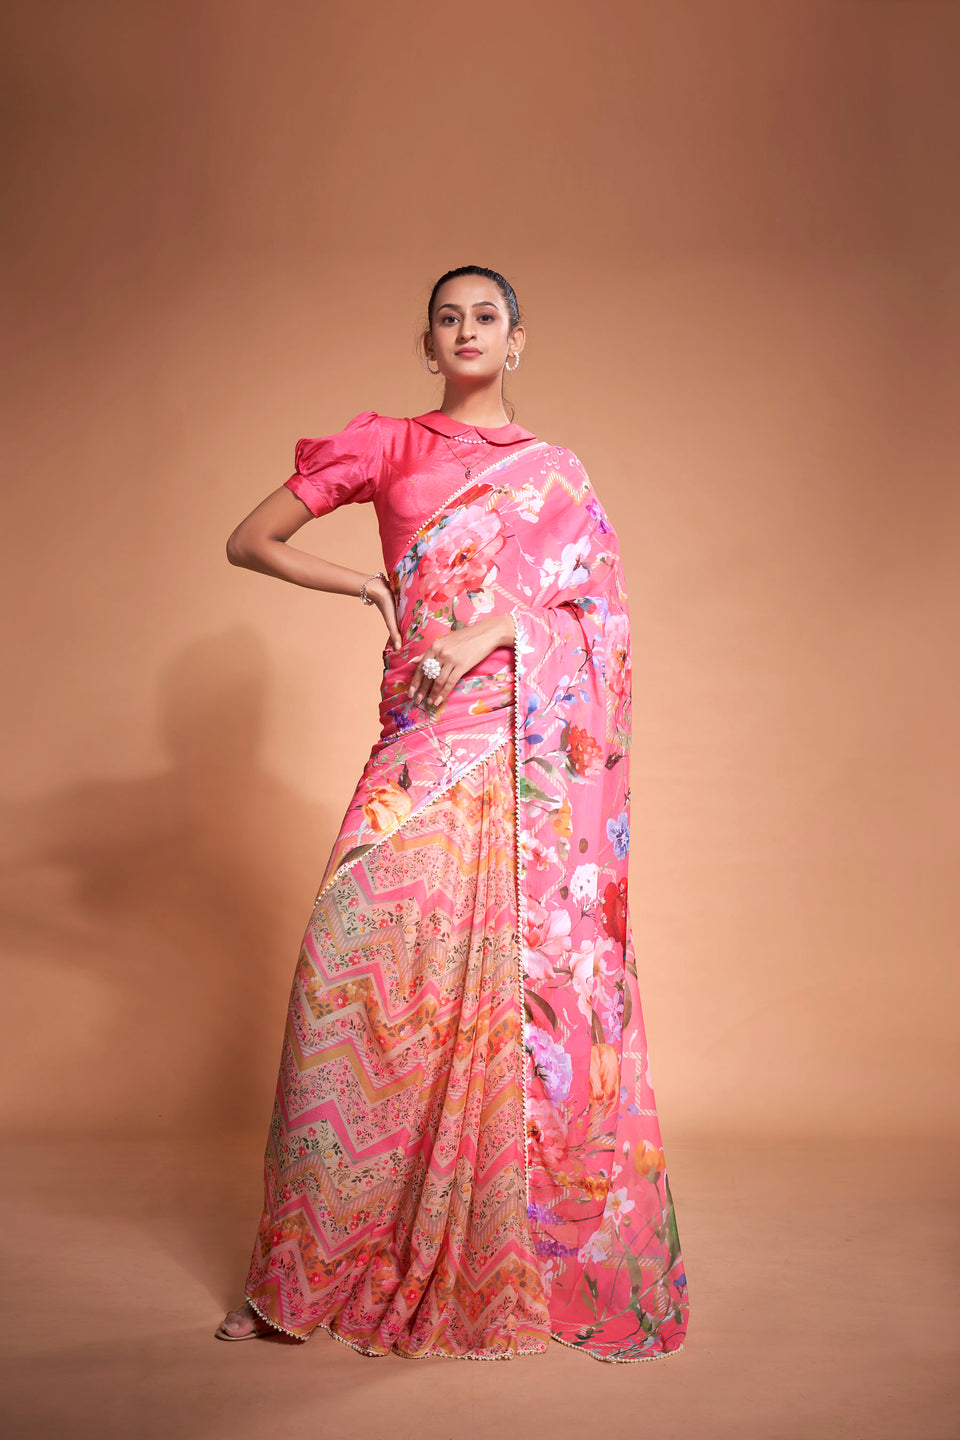 Hot Pink Floral Printed Chiffon Saree with Pearl Lace | Vogzy